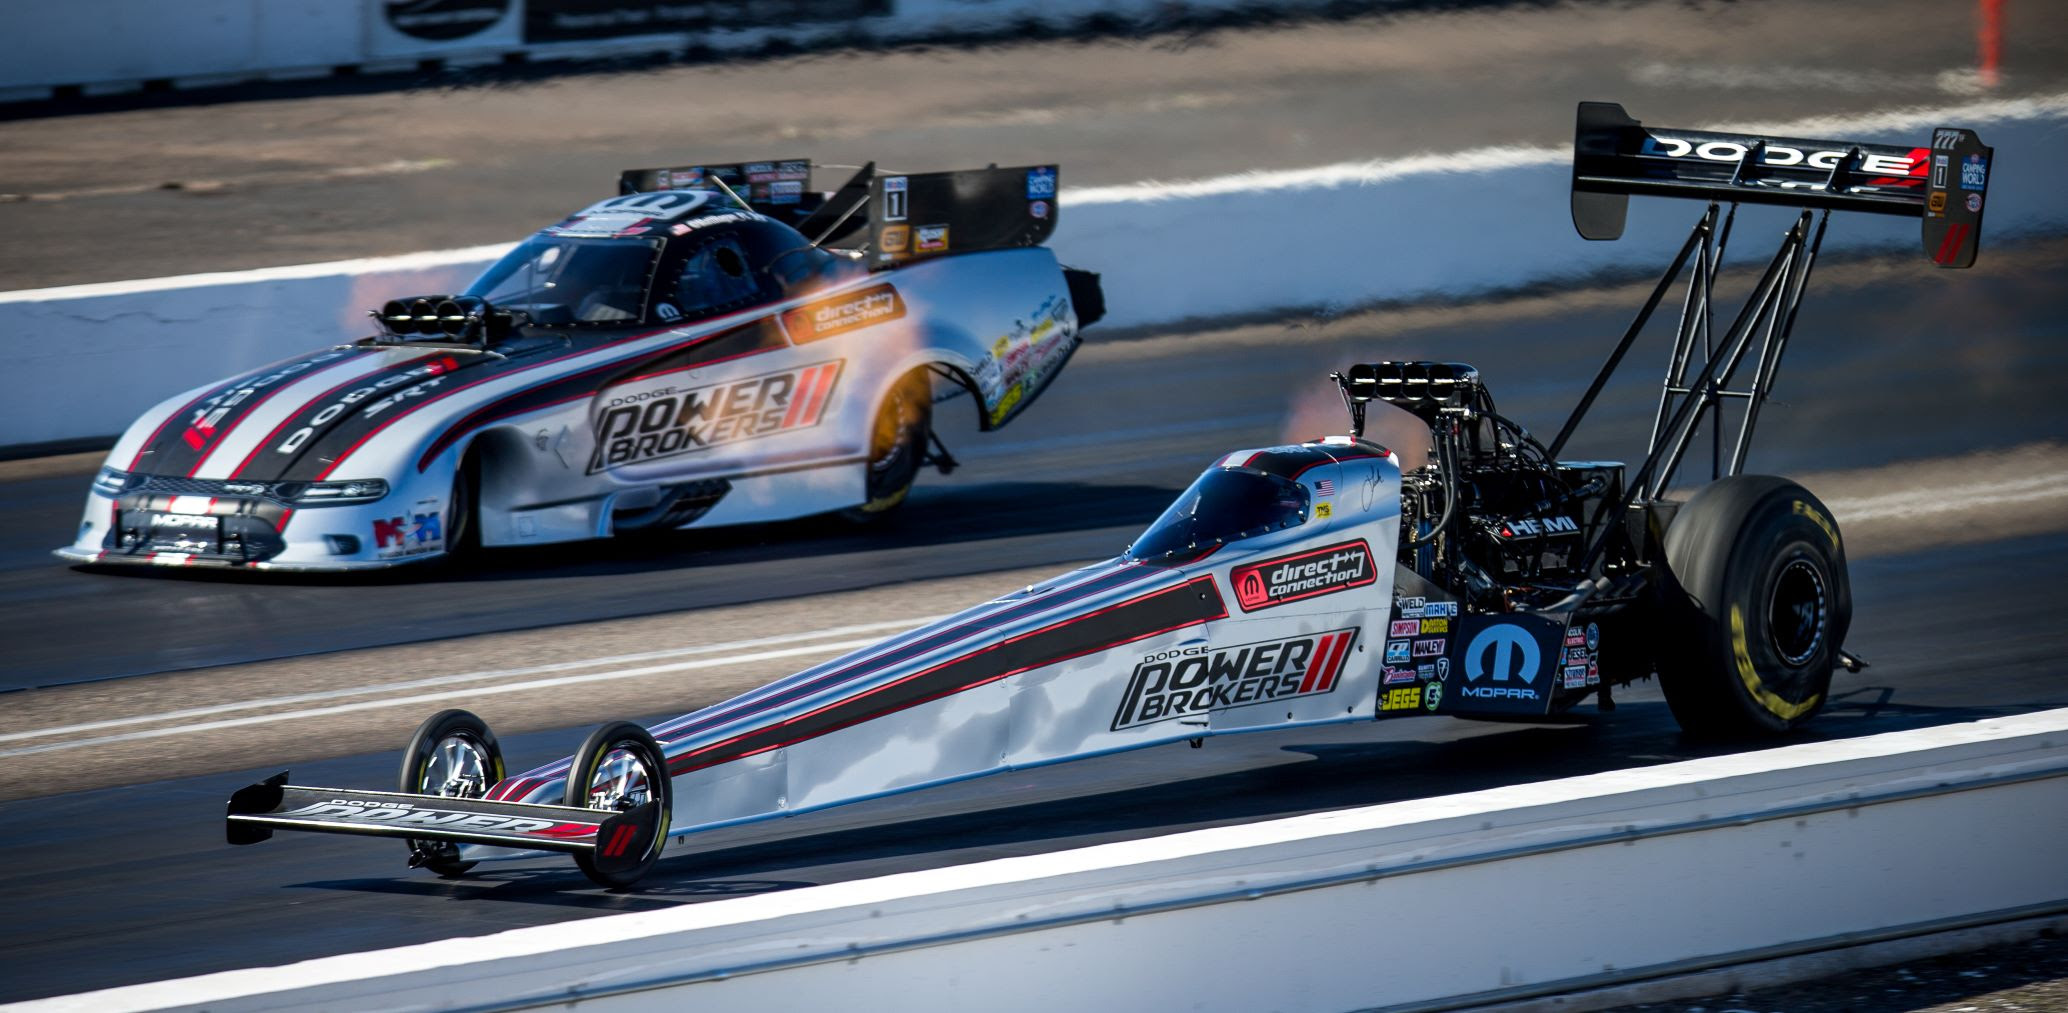 Tony Stewart Racing New Hampshire Advance for the NHRA New England